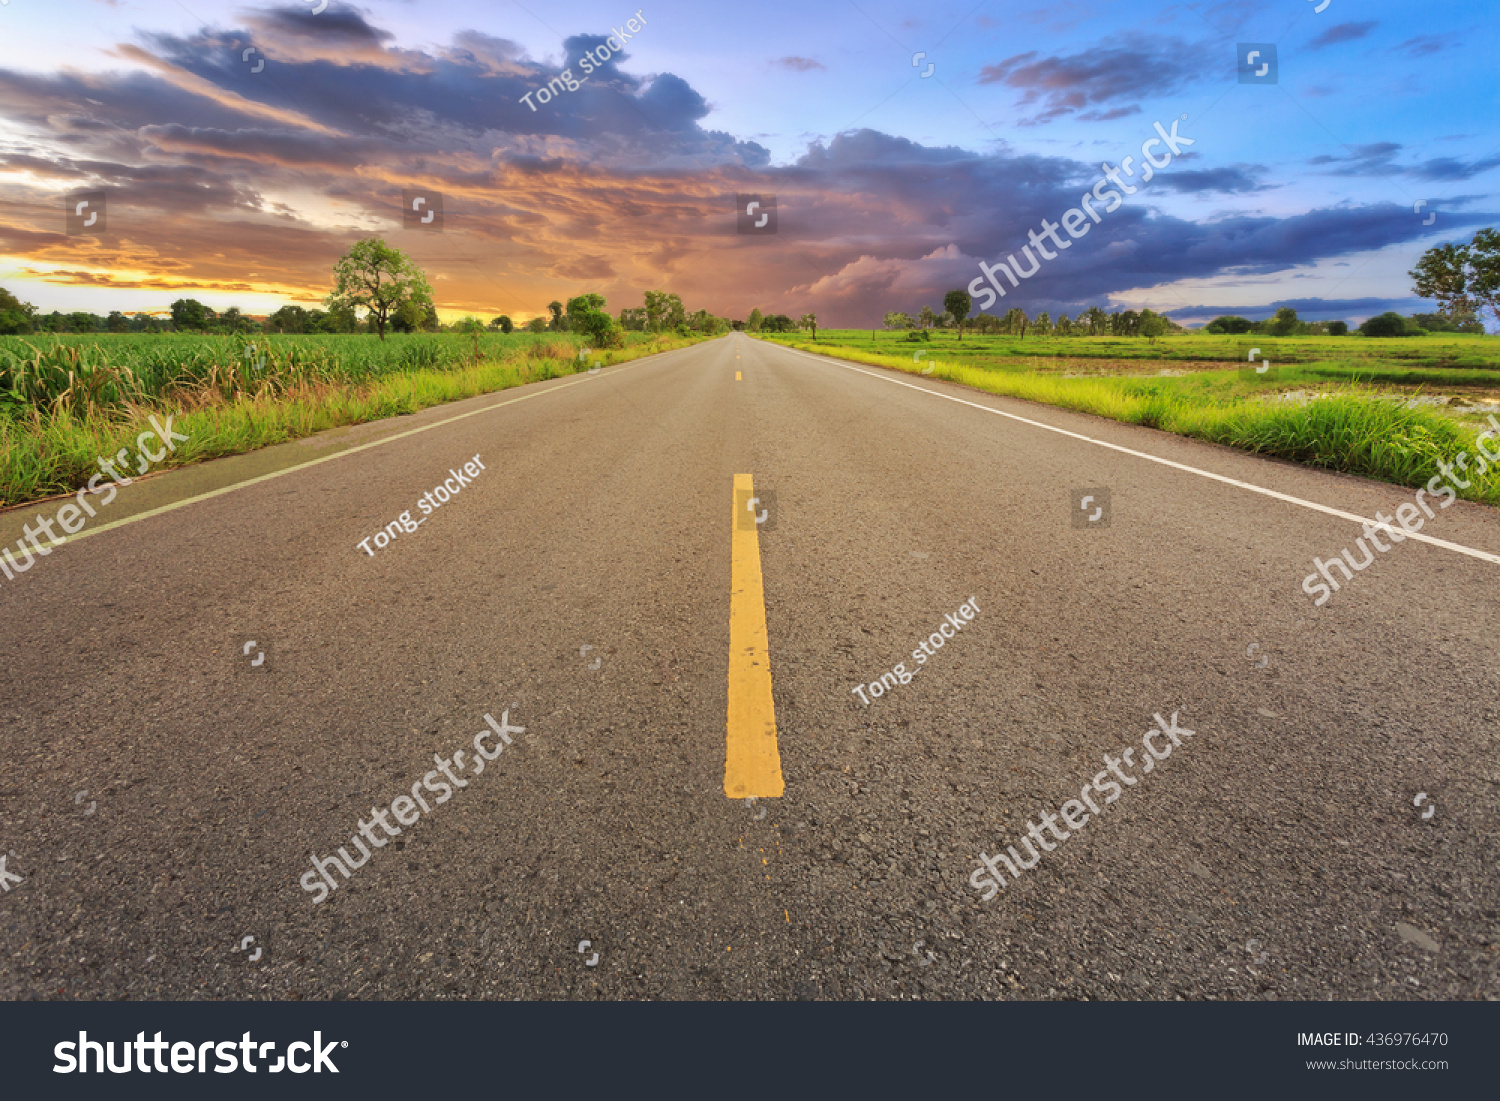 Empty blur asphalt road and sunlight and sign which symbol success. Concept for success. #436976470